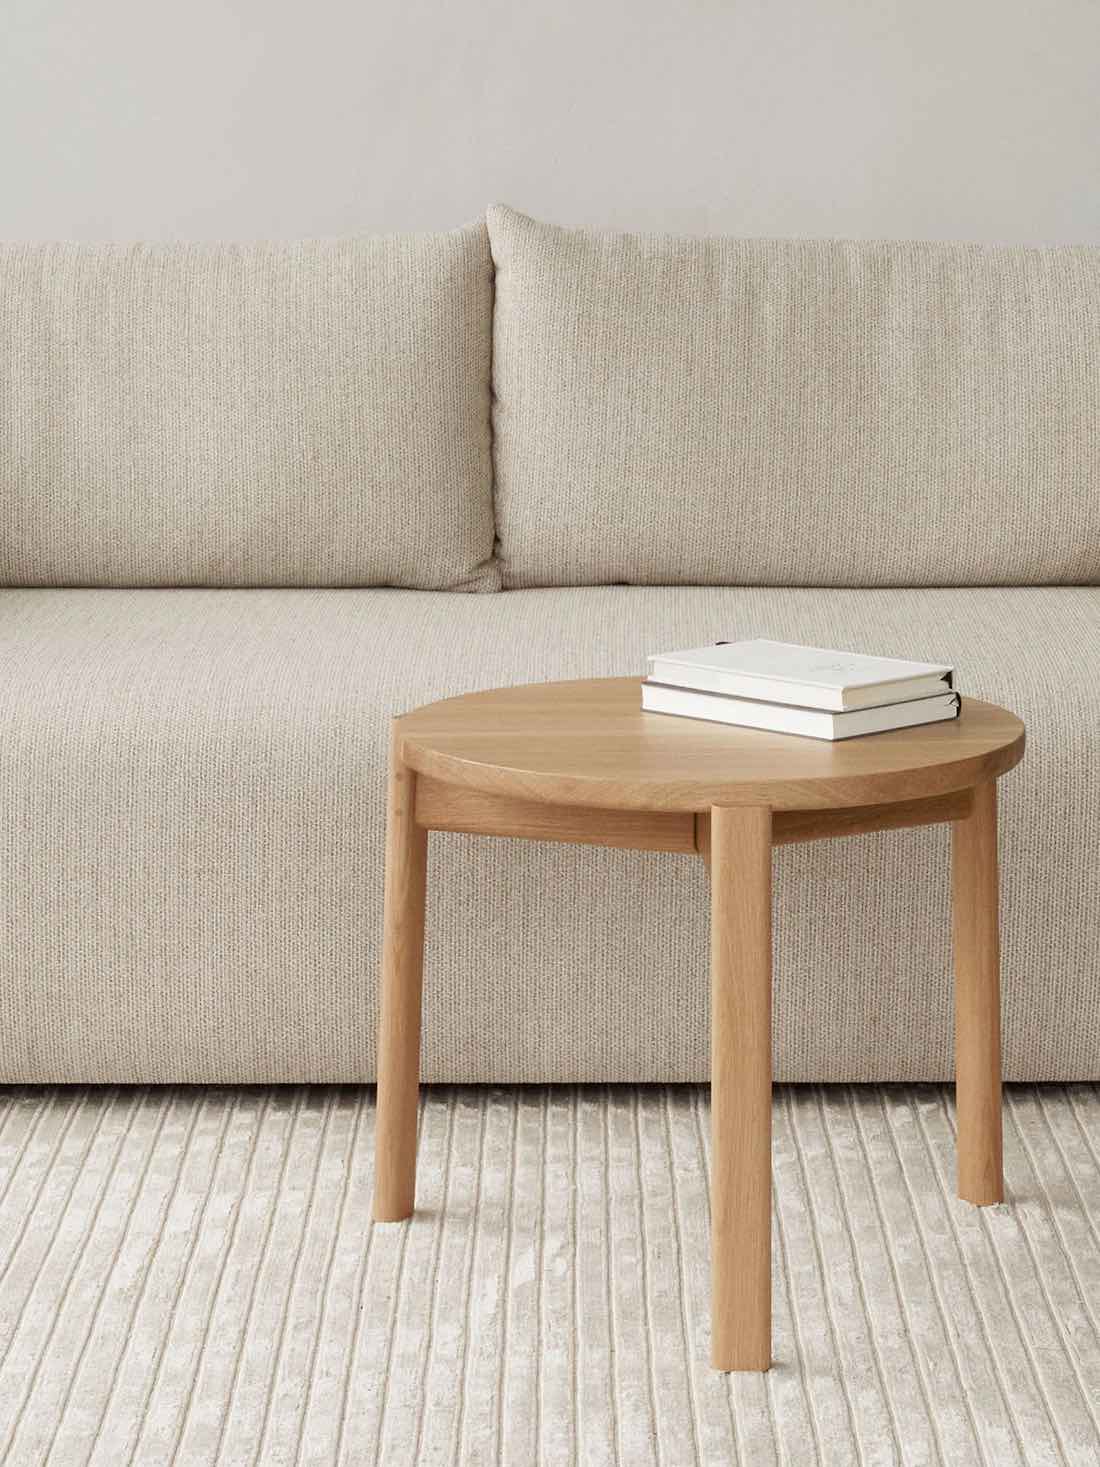 Side view of the Passage Lounge Table Natural Oak with 2 books on top